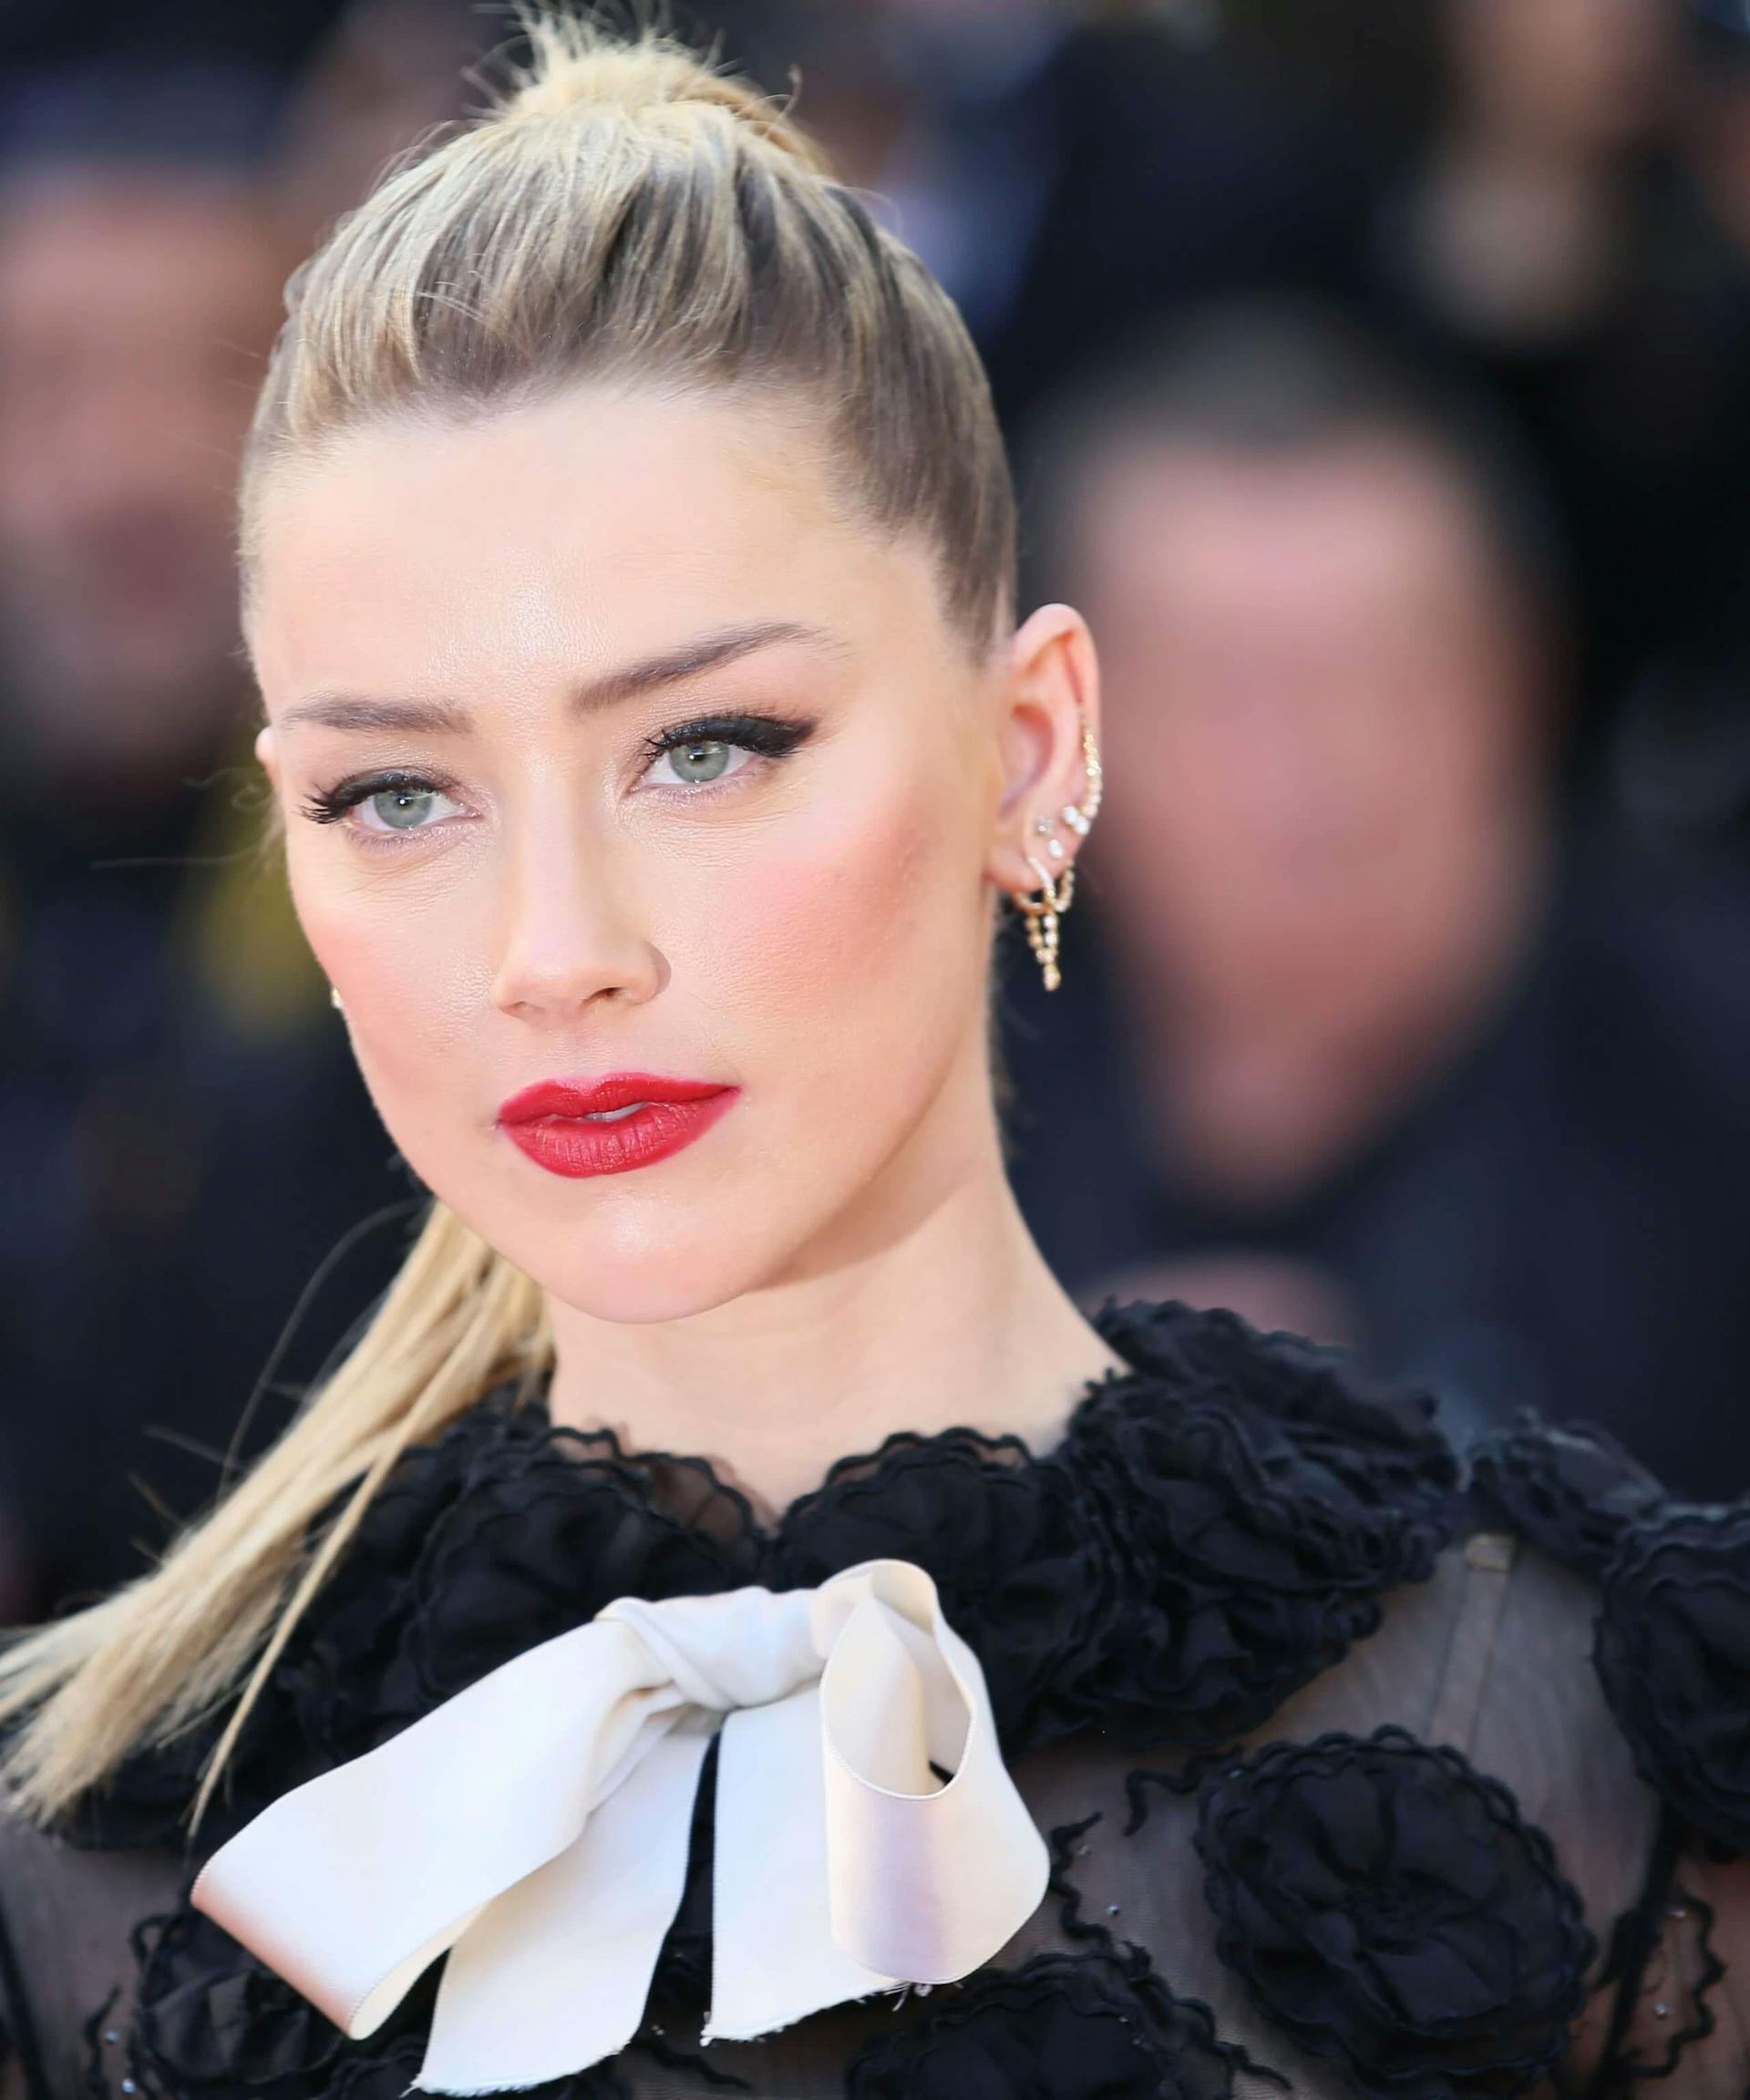 Amber Heard Investigated For Perjury